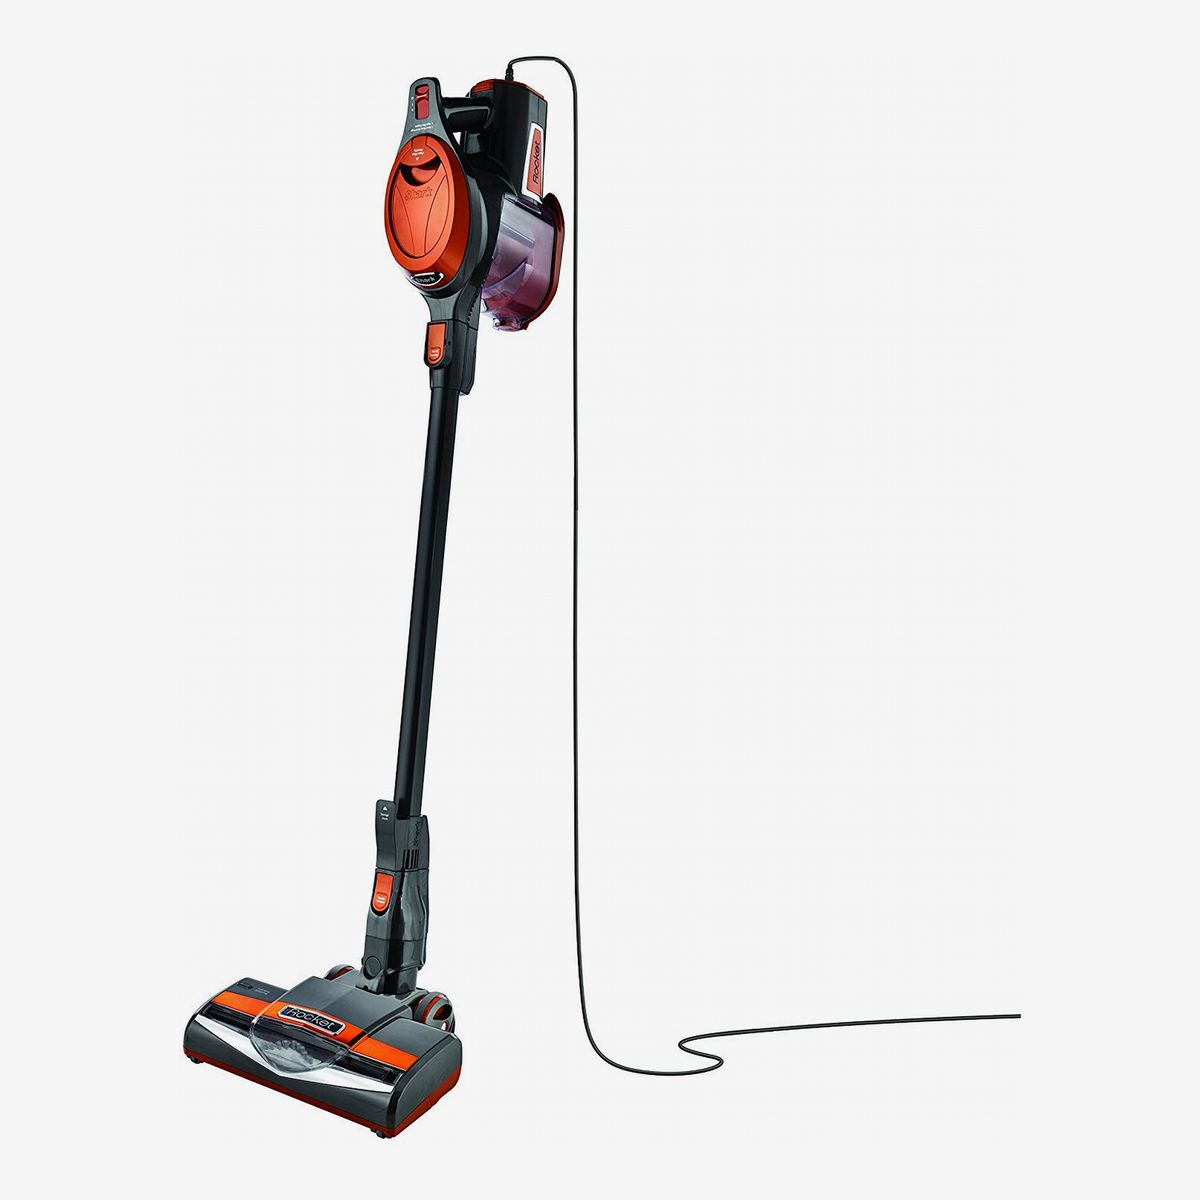 18 Best Vacuums For Pet Hair 2022 The, Best Cordless Vacuum For Pet Hair And Hardwood Floors Carpet